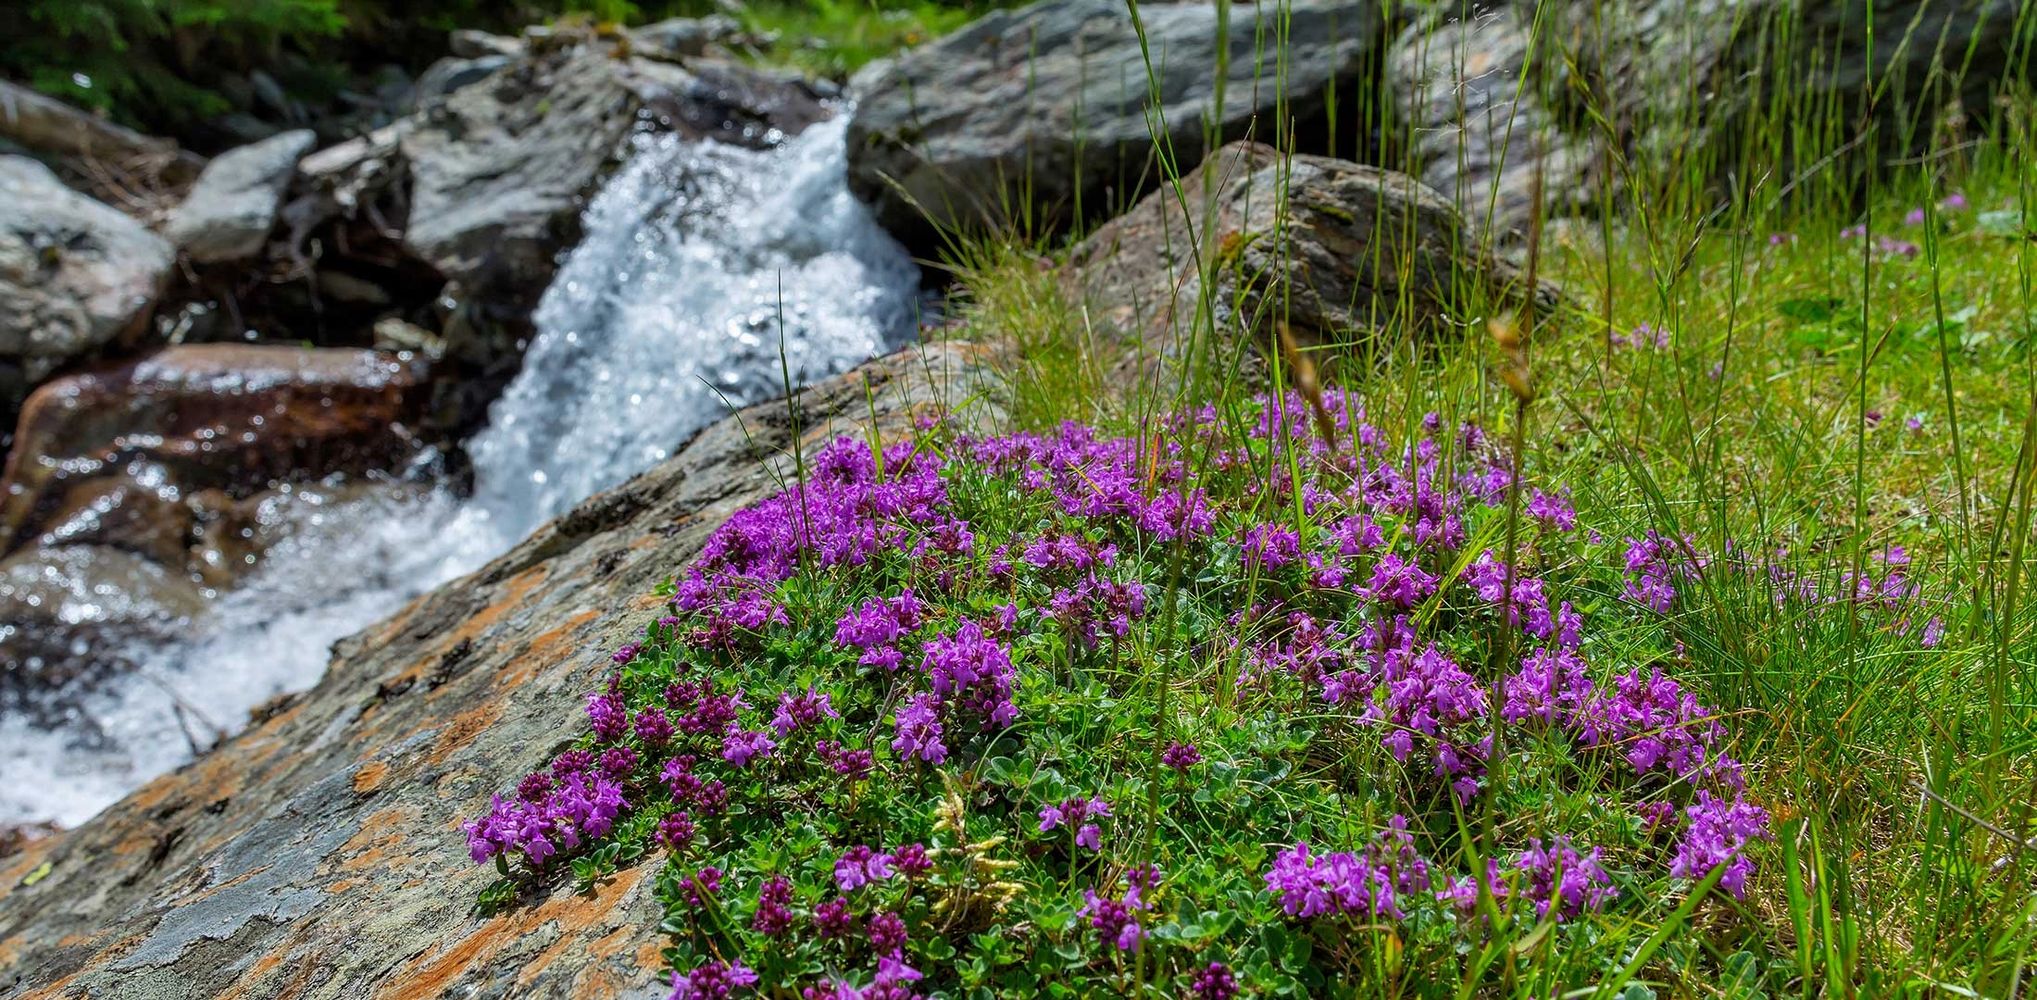 Purple flowers and grass next to a fresh water waterfall - Earth as the Garden of Eden